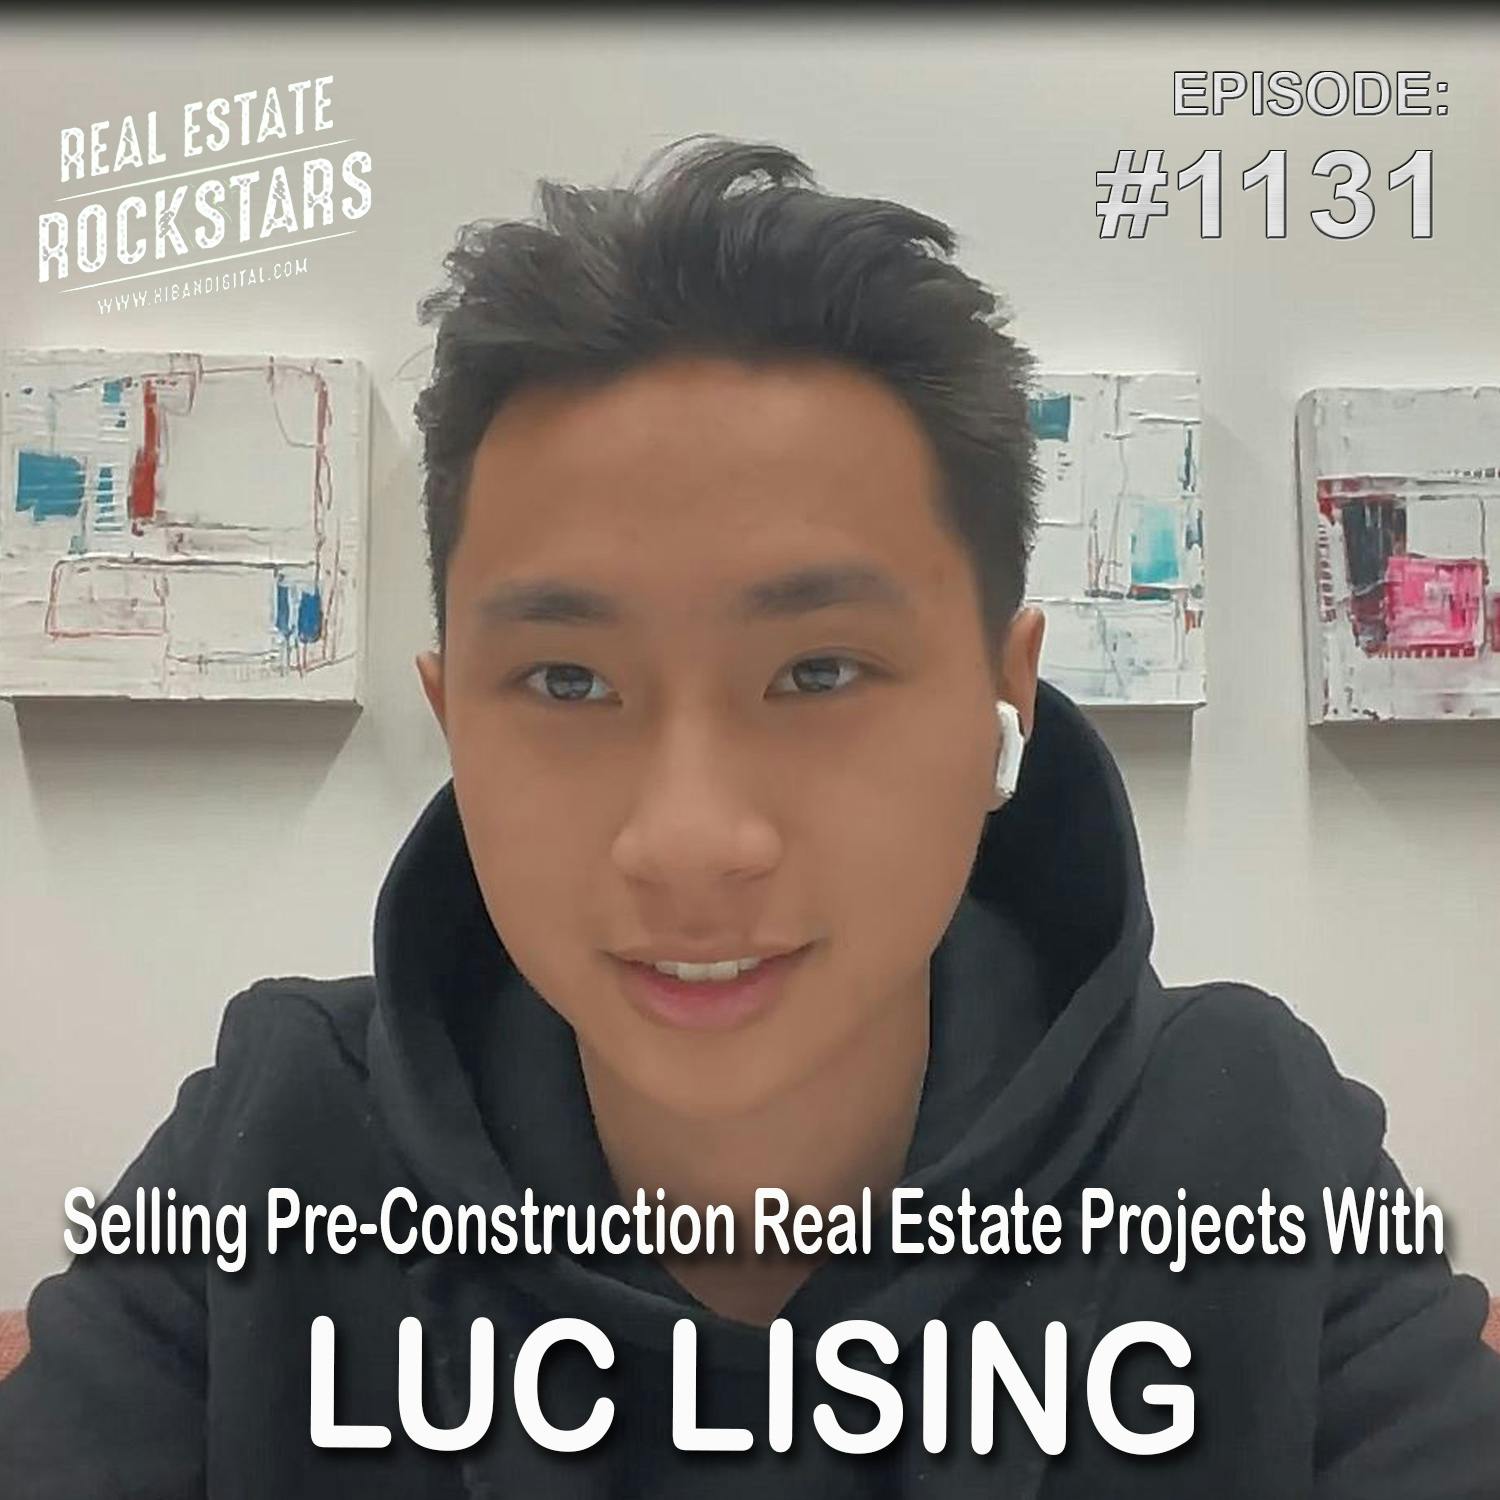 1131: Selling Pre-Construction Real Estate Projects With Luc Lising